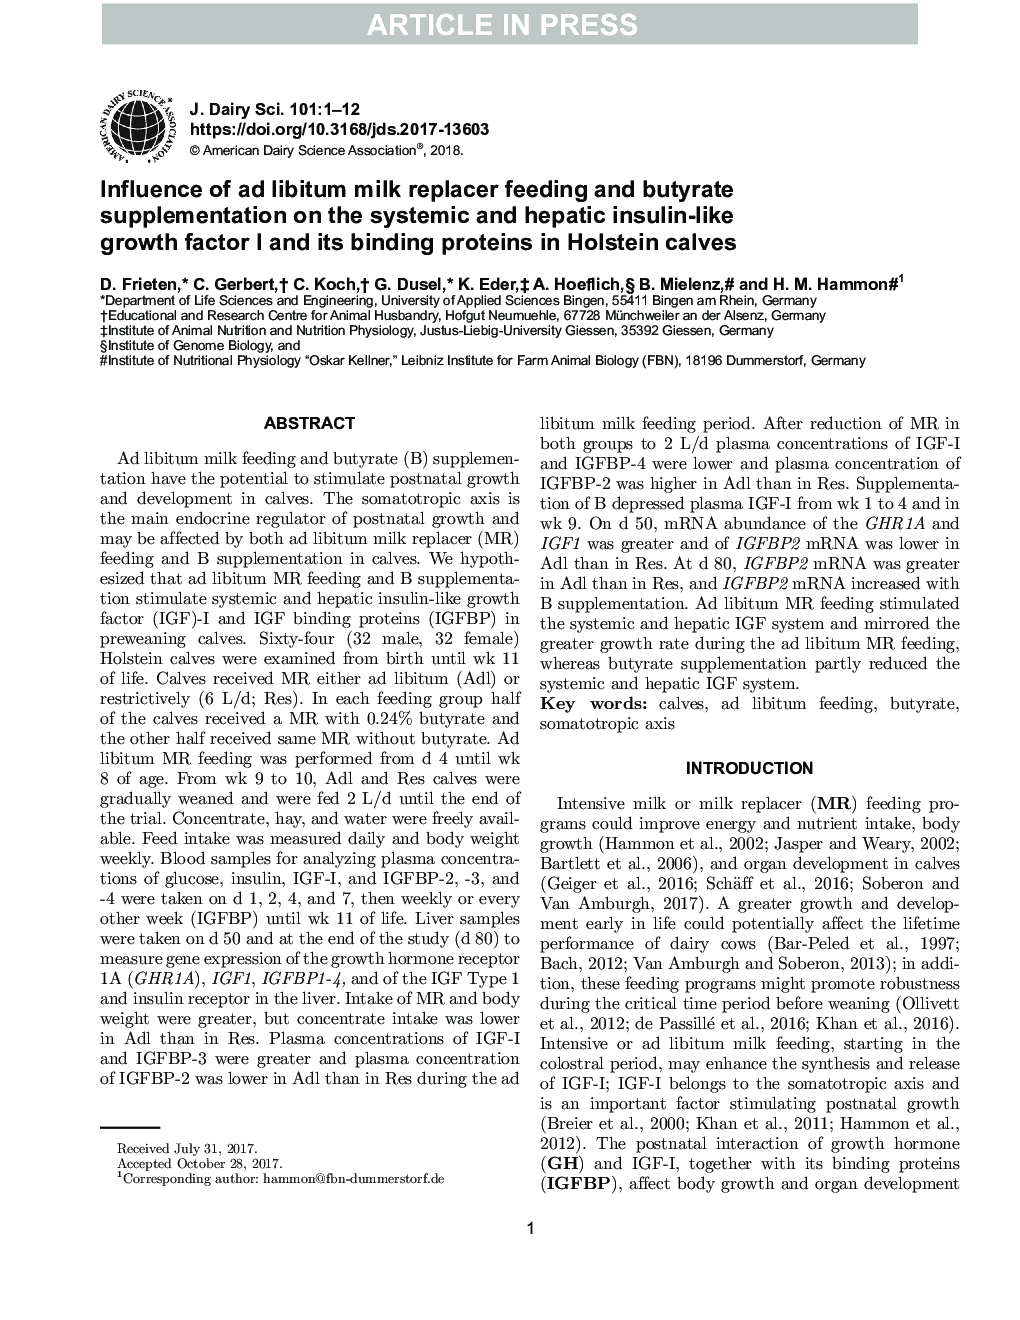 Influence of ad libitum milk replacer feeding and butyrate supplementation on the systemic and hepatic insulin-like growth factor I and its binding proteins in Holstein calves